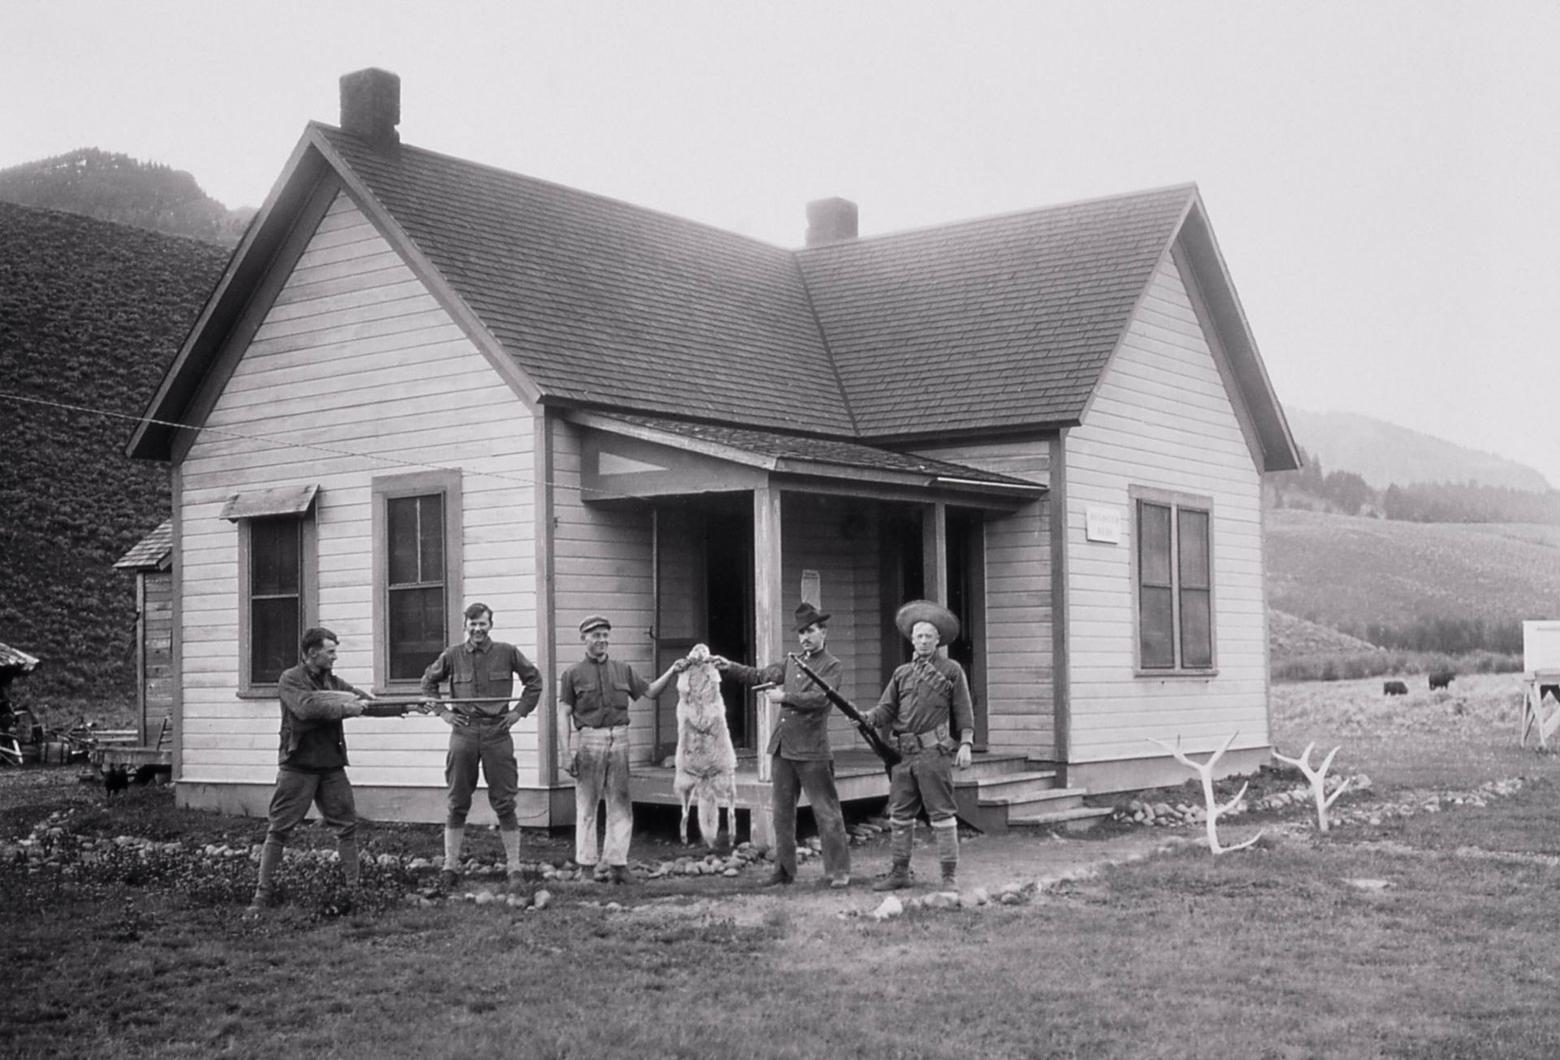 Members of the occupying cavalry pose with a wolf pelt at Soda Butte patrol station in 1905. Within a quarter century, all wolves in Yellowstone would be eliminated, based on the false justification that eliminating "bad" predators is good for the ecosystem.